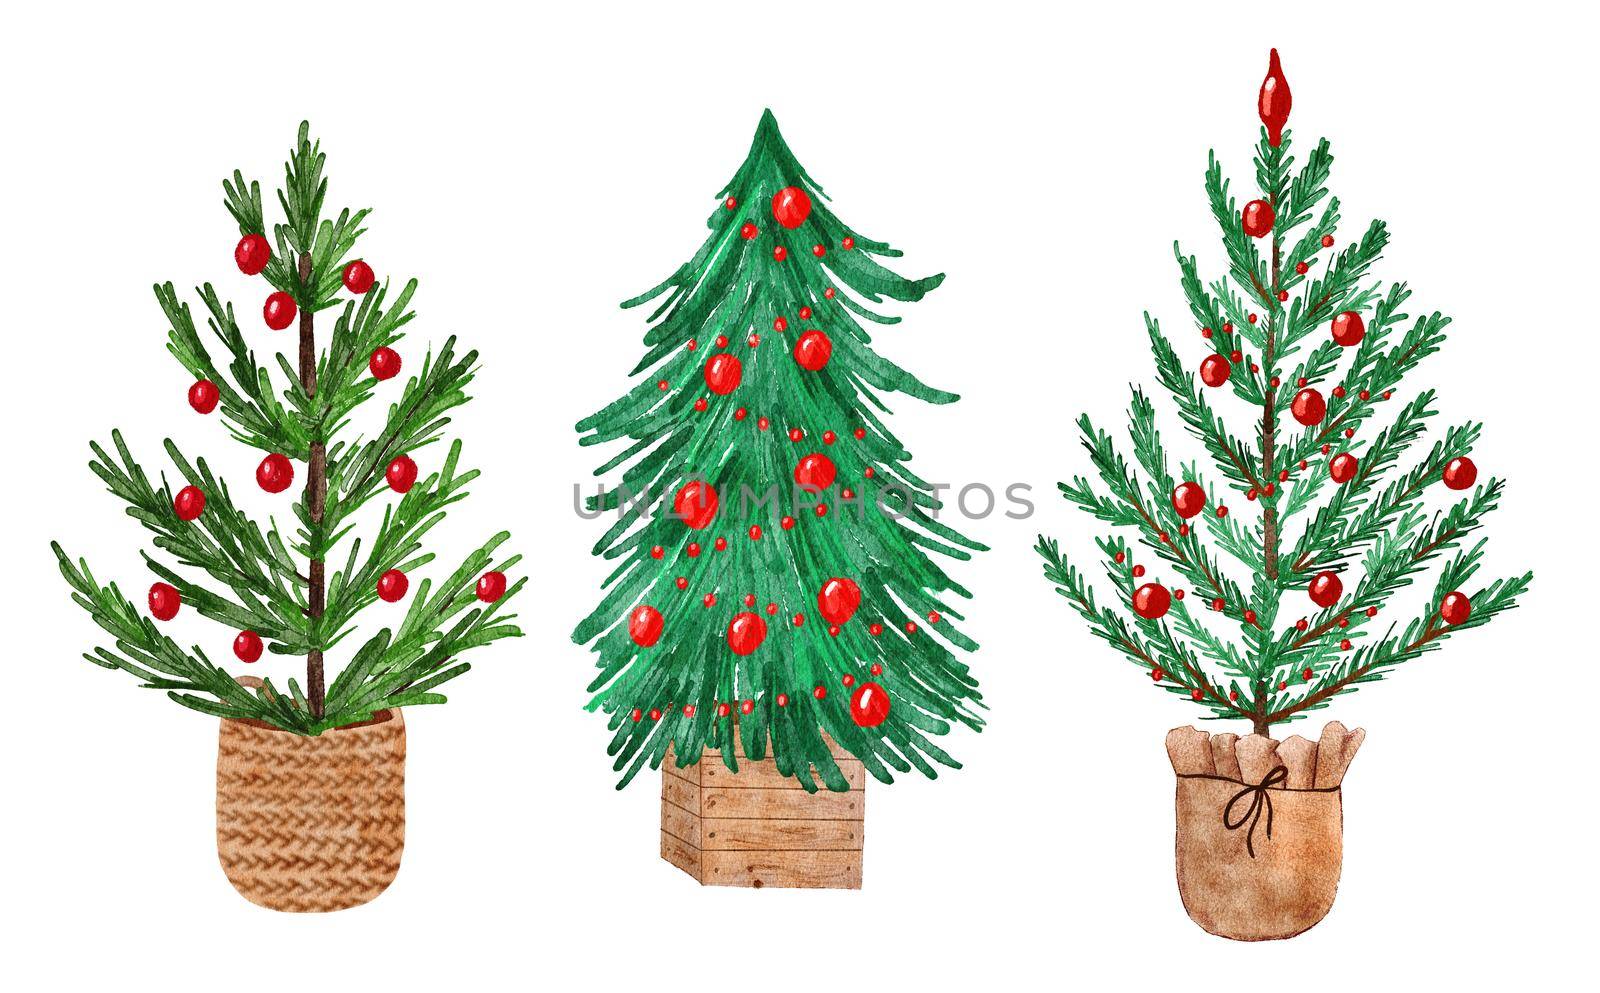 Watercolor hand drawn pine Christmas trees with red ornaments in beige brown scandinavian containers, basket wood crate. Winter holiday spruce fir tree design in nordic minimalist cozy interior trendy style. by Lagmar